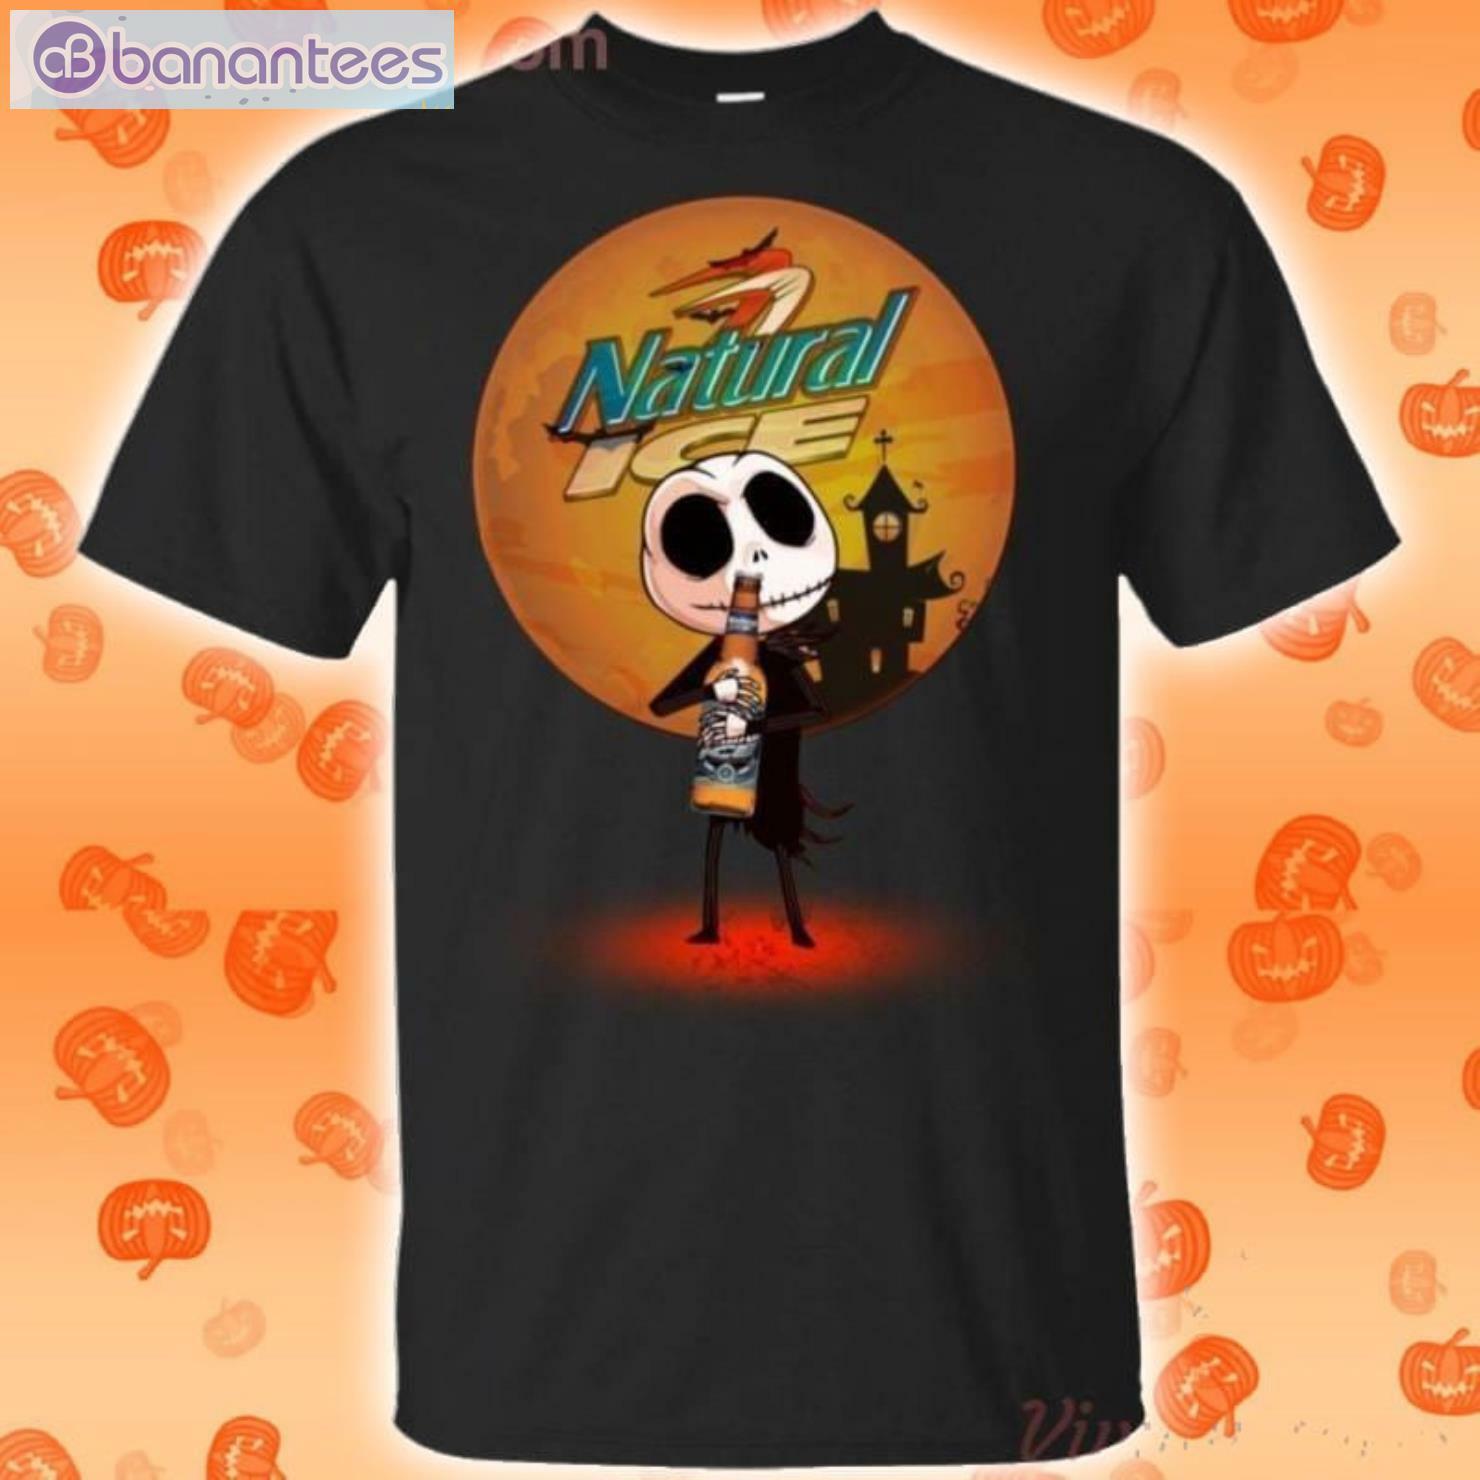 Jack Skellington Hold Natural Ice Beer Halloween T-Shirt Product Photo 1 Product photo 1